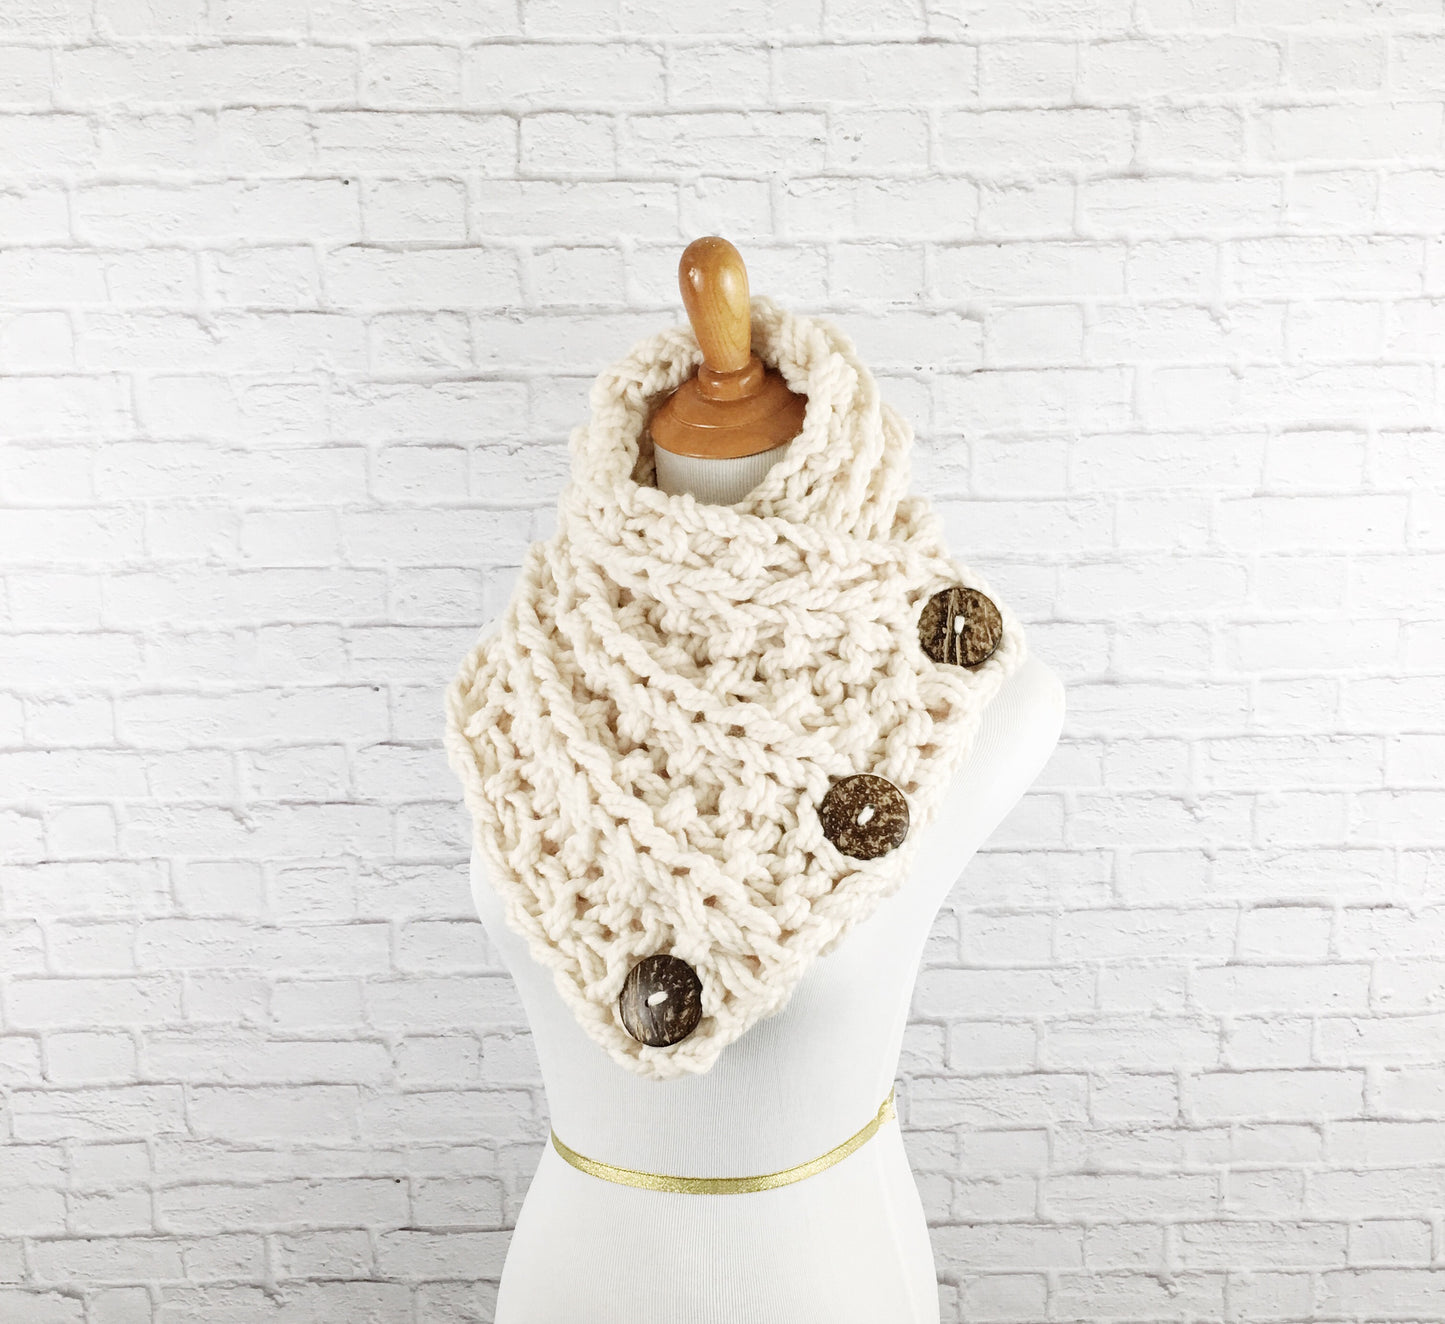 Knit Button Scarf Chunky Knitted Wrap Warmer Snood - The Kenduskeag